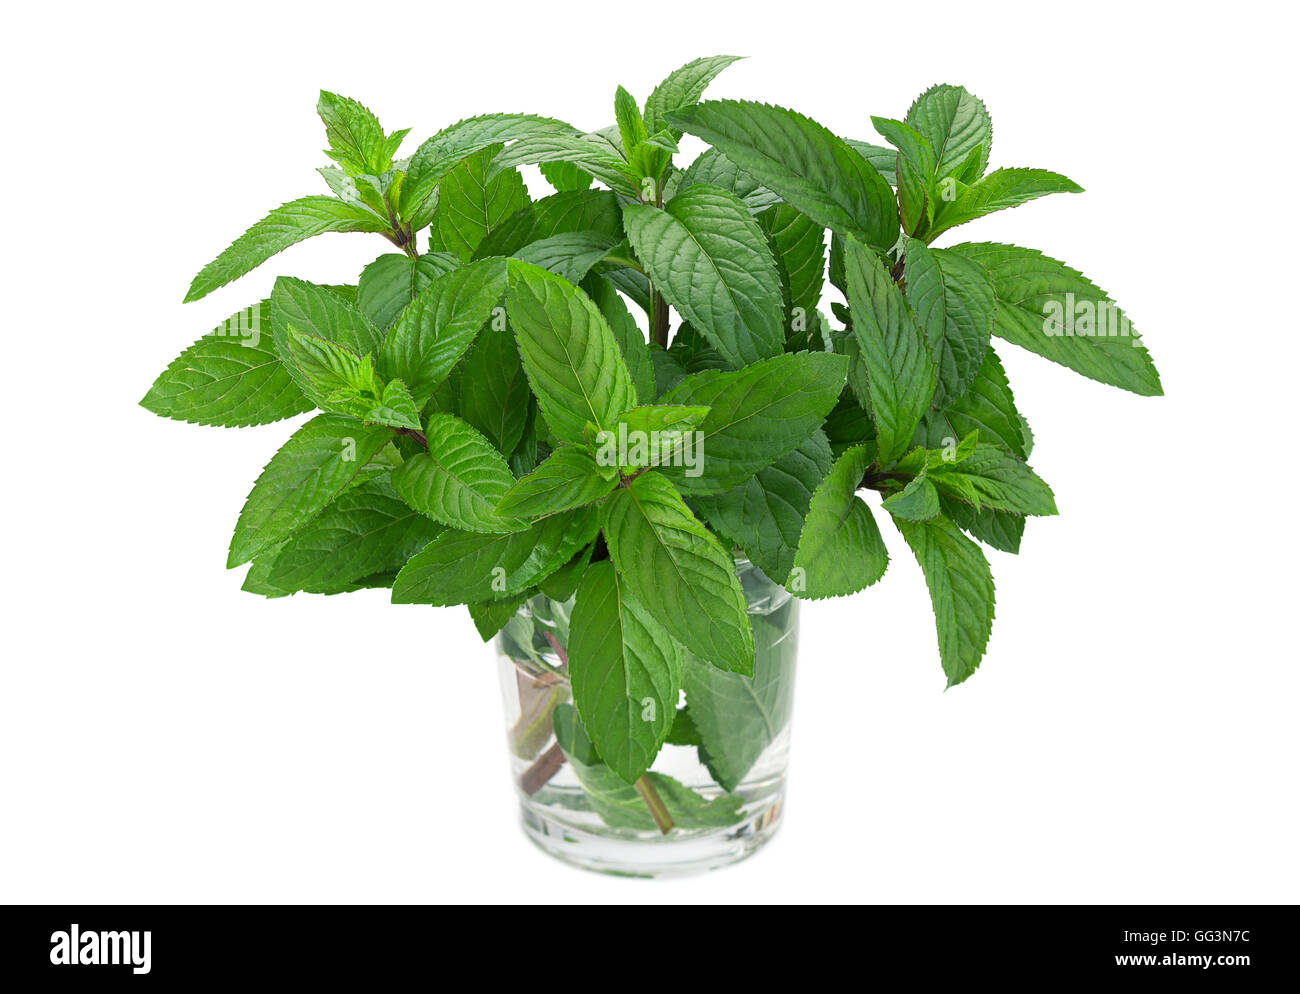 Peppermint leaf closeup isolated on white background Stock Photo